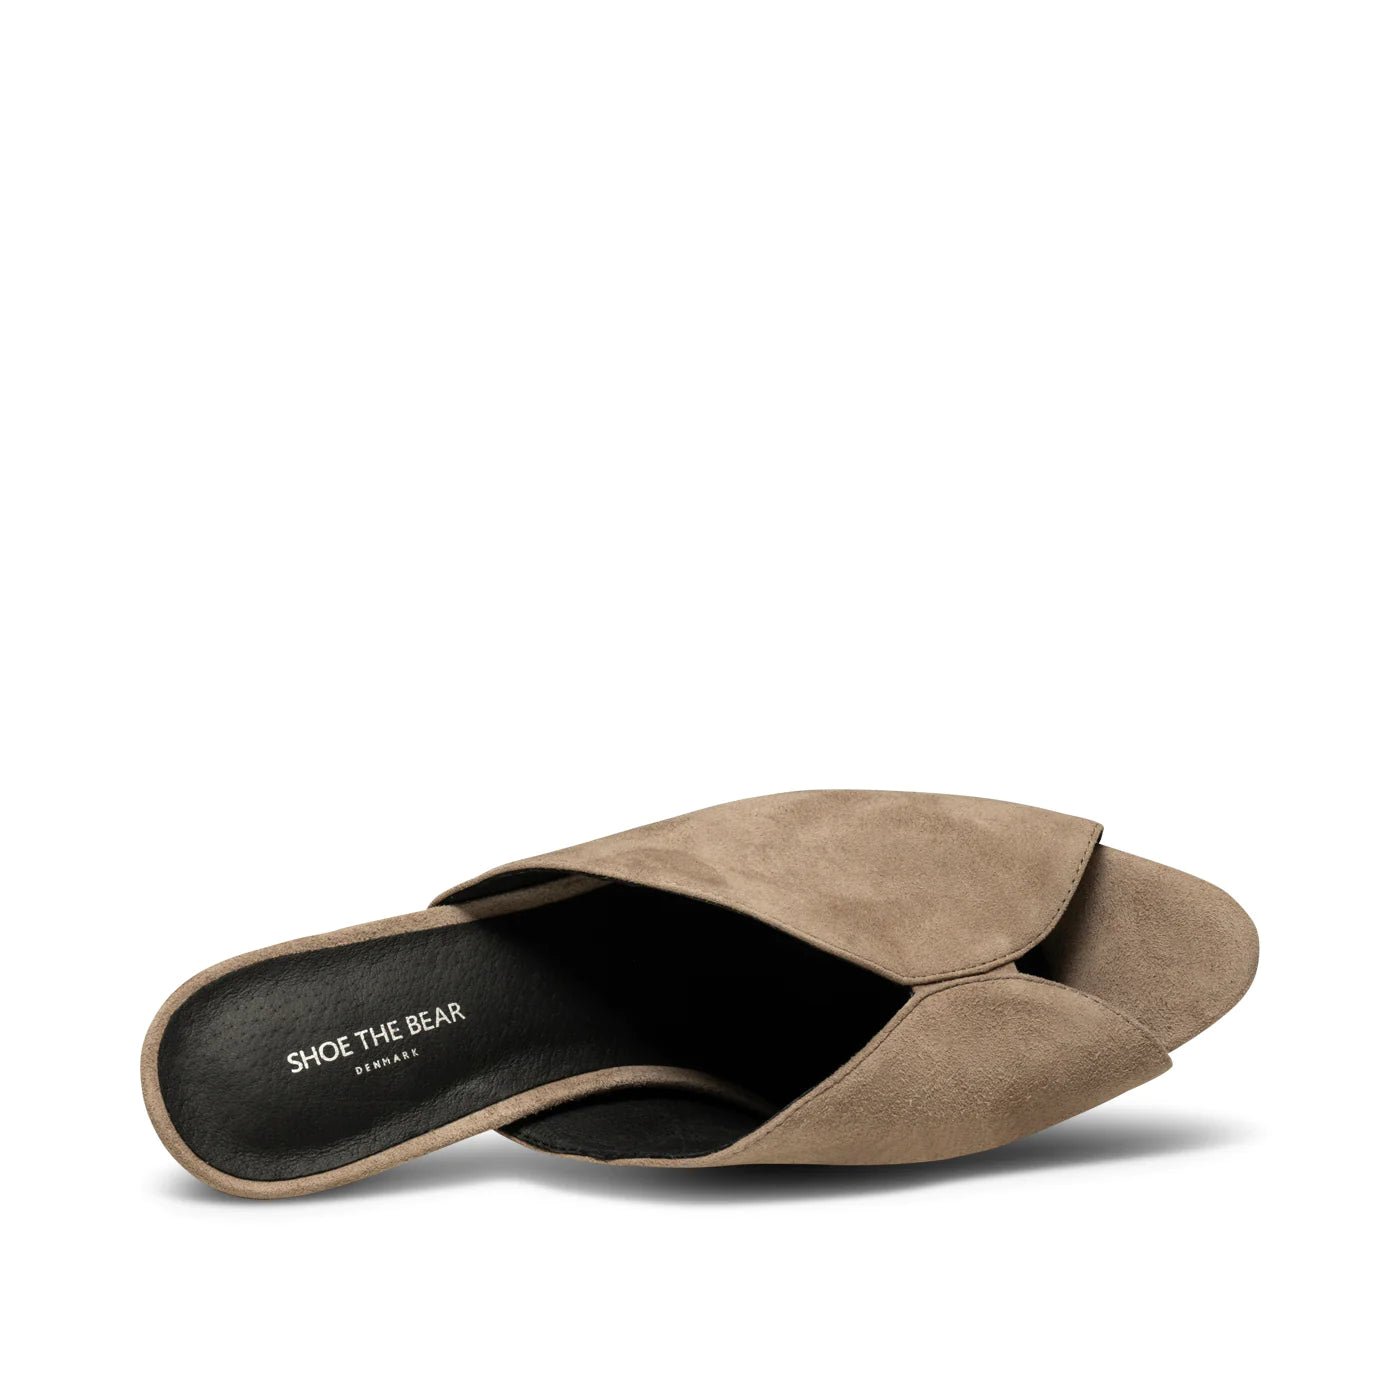 SHOE THE BEAR - VALENTINE SANDAL SUEDE TAUPE - Annabelle 87